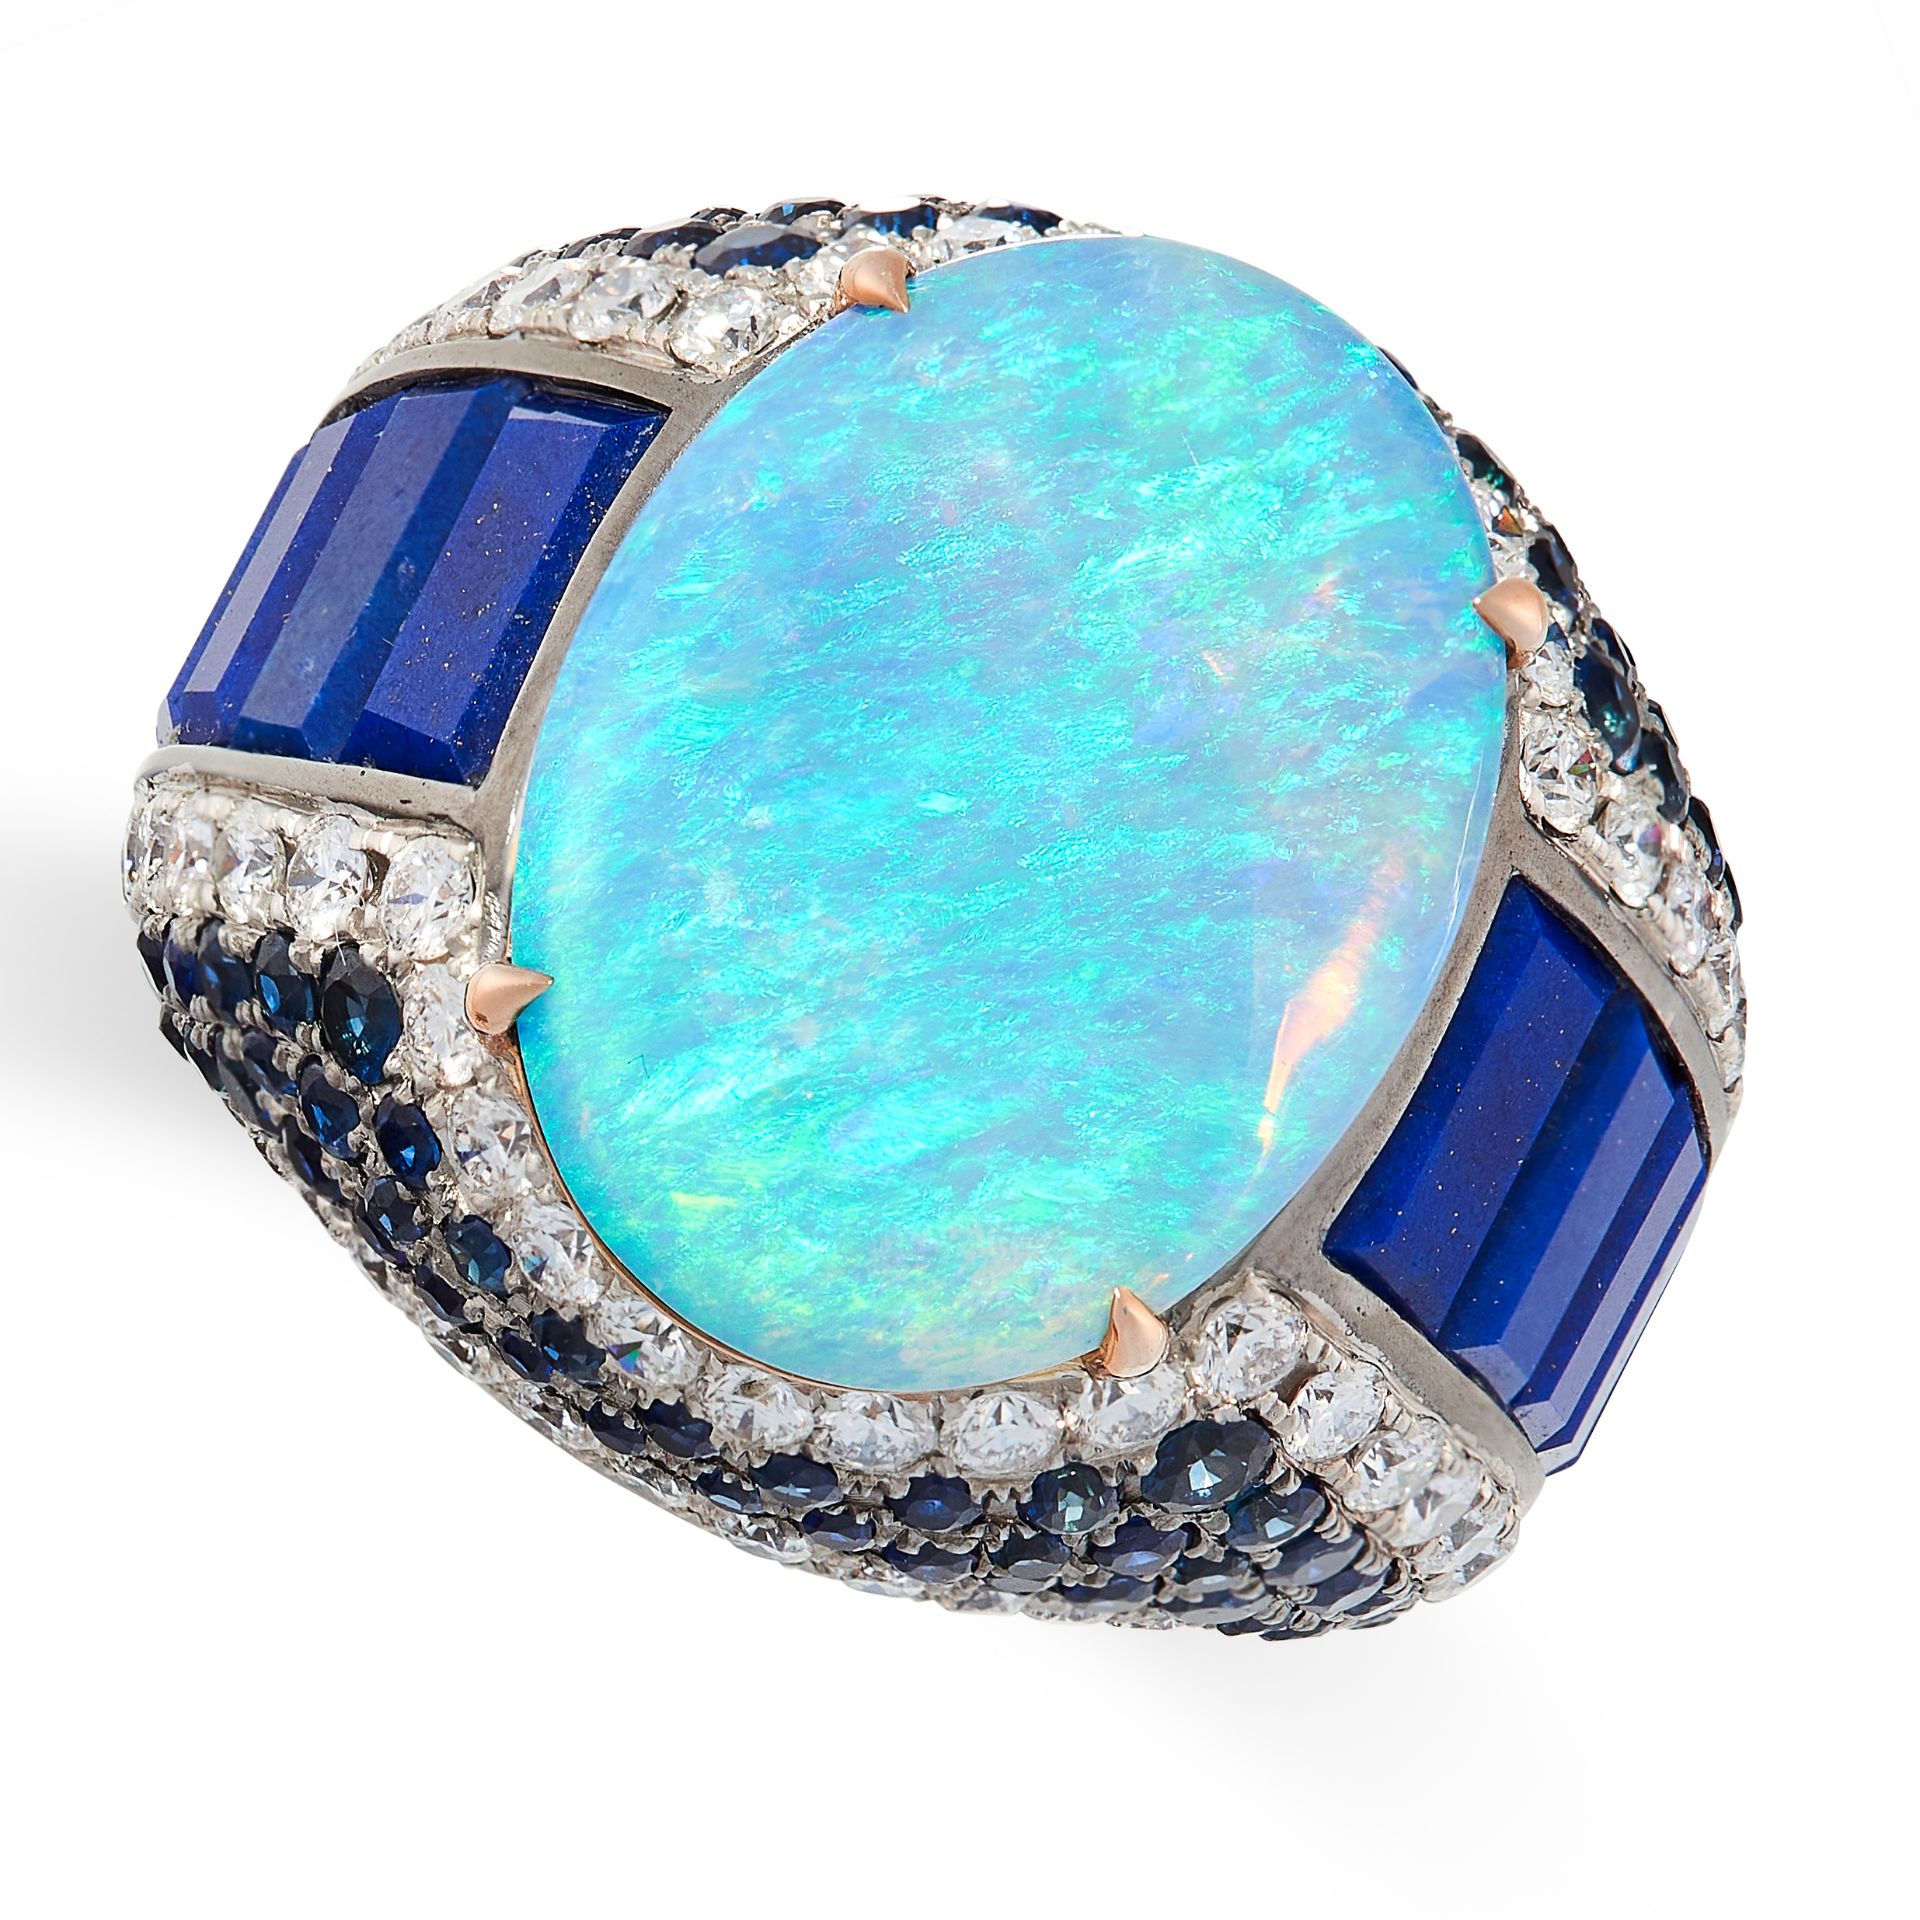 AN OPAL, LAPIS LAZULI, SAPPHIRE AND DIAMOND COCKTAIL RING, FEI LIU in 18ct white gold, of bombe